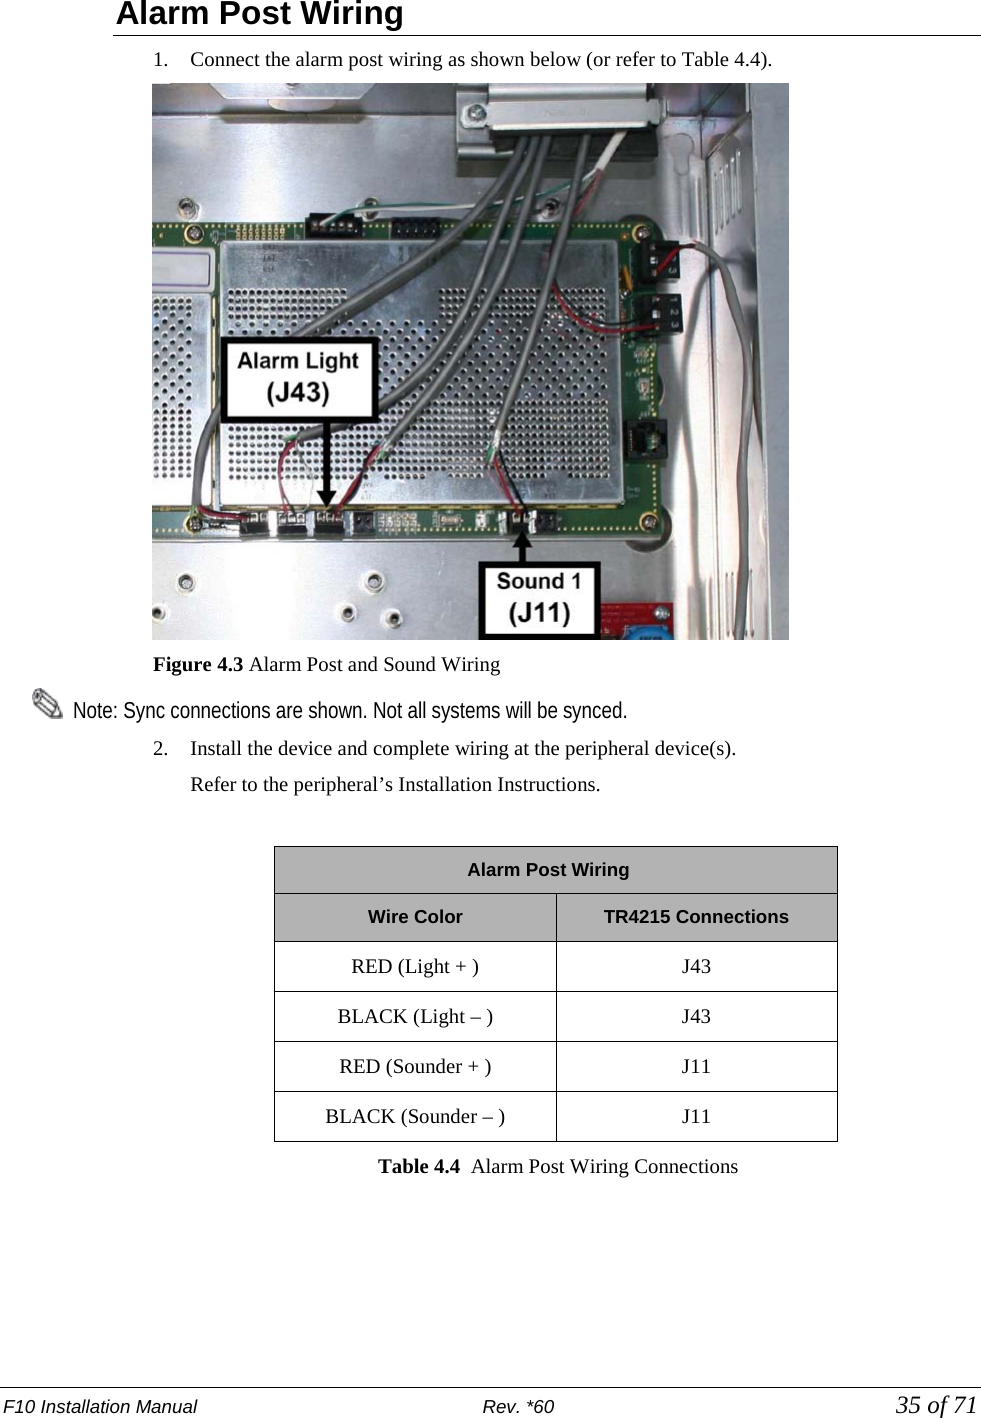 F10 Installation Manual                          Rev. *60            35 of 71 Alarm Post Wiring  1. Connect the alarm post wiring as shown below (or refer to Table 4.4).   Figure 4.3 Alarm Post and Sound Wiring   Note: Sync connections are shown. Not all systems will be synced.  2. Install the device and complete wiring at the peripheral device(s). Refer to the peripheral’s Installation Instructions.         Alarm Post Wiring Wire Color TR4215 Connections RED (Light + ) J43 BLACK (Light – )  J43 RED (Sounder + ) J11 BLACK (Sounder – )  J11 Table 4.4  Alarm Post Wiring Connections 